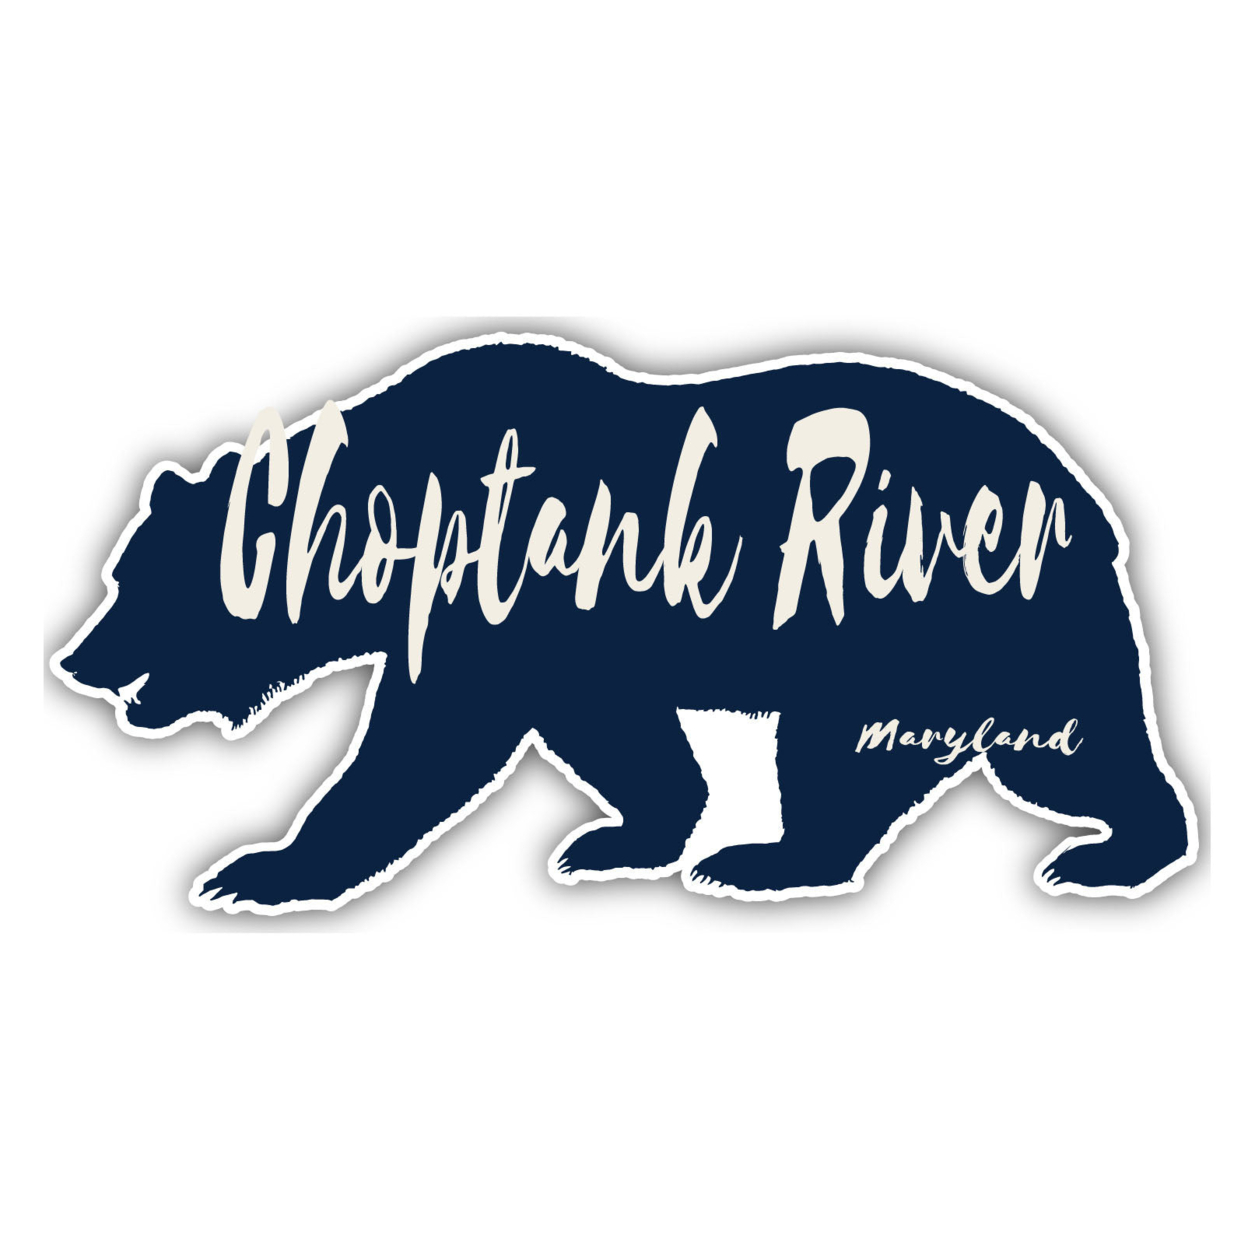 Choptank River Maryland Souvenir Decorative Stickers (Choose Theme And Size) - 4-Pack, 6-Inch, Bear